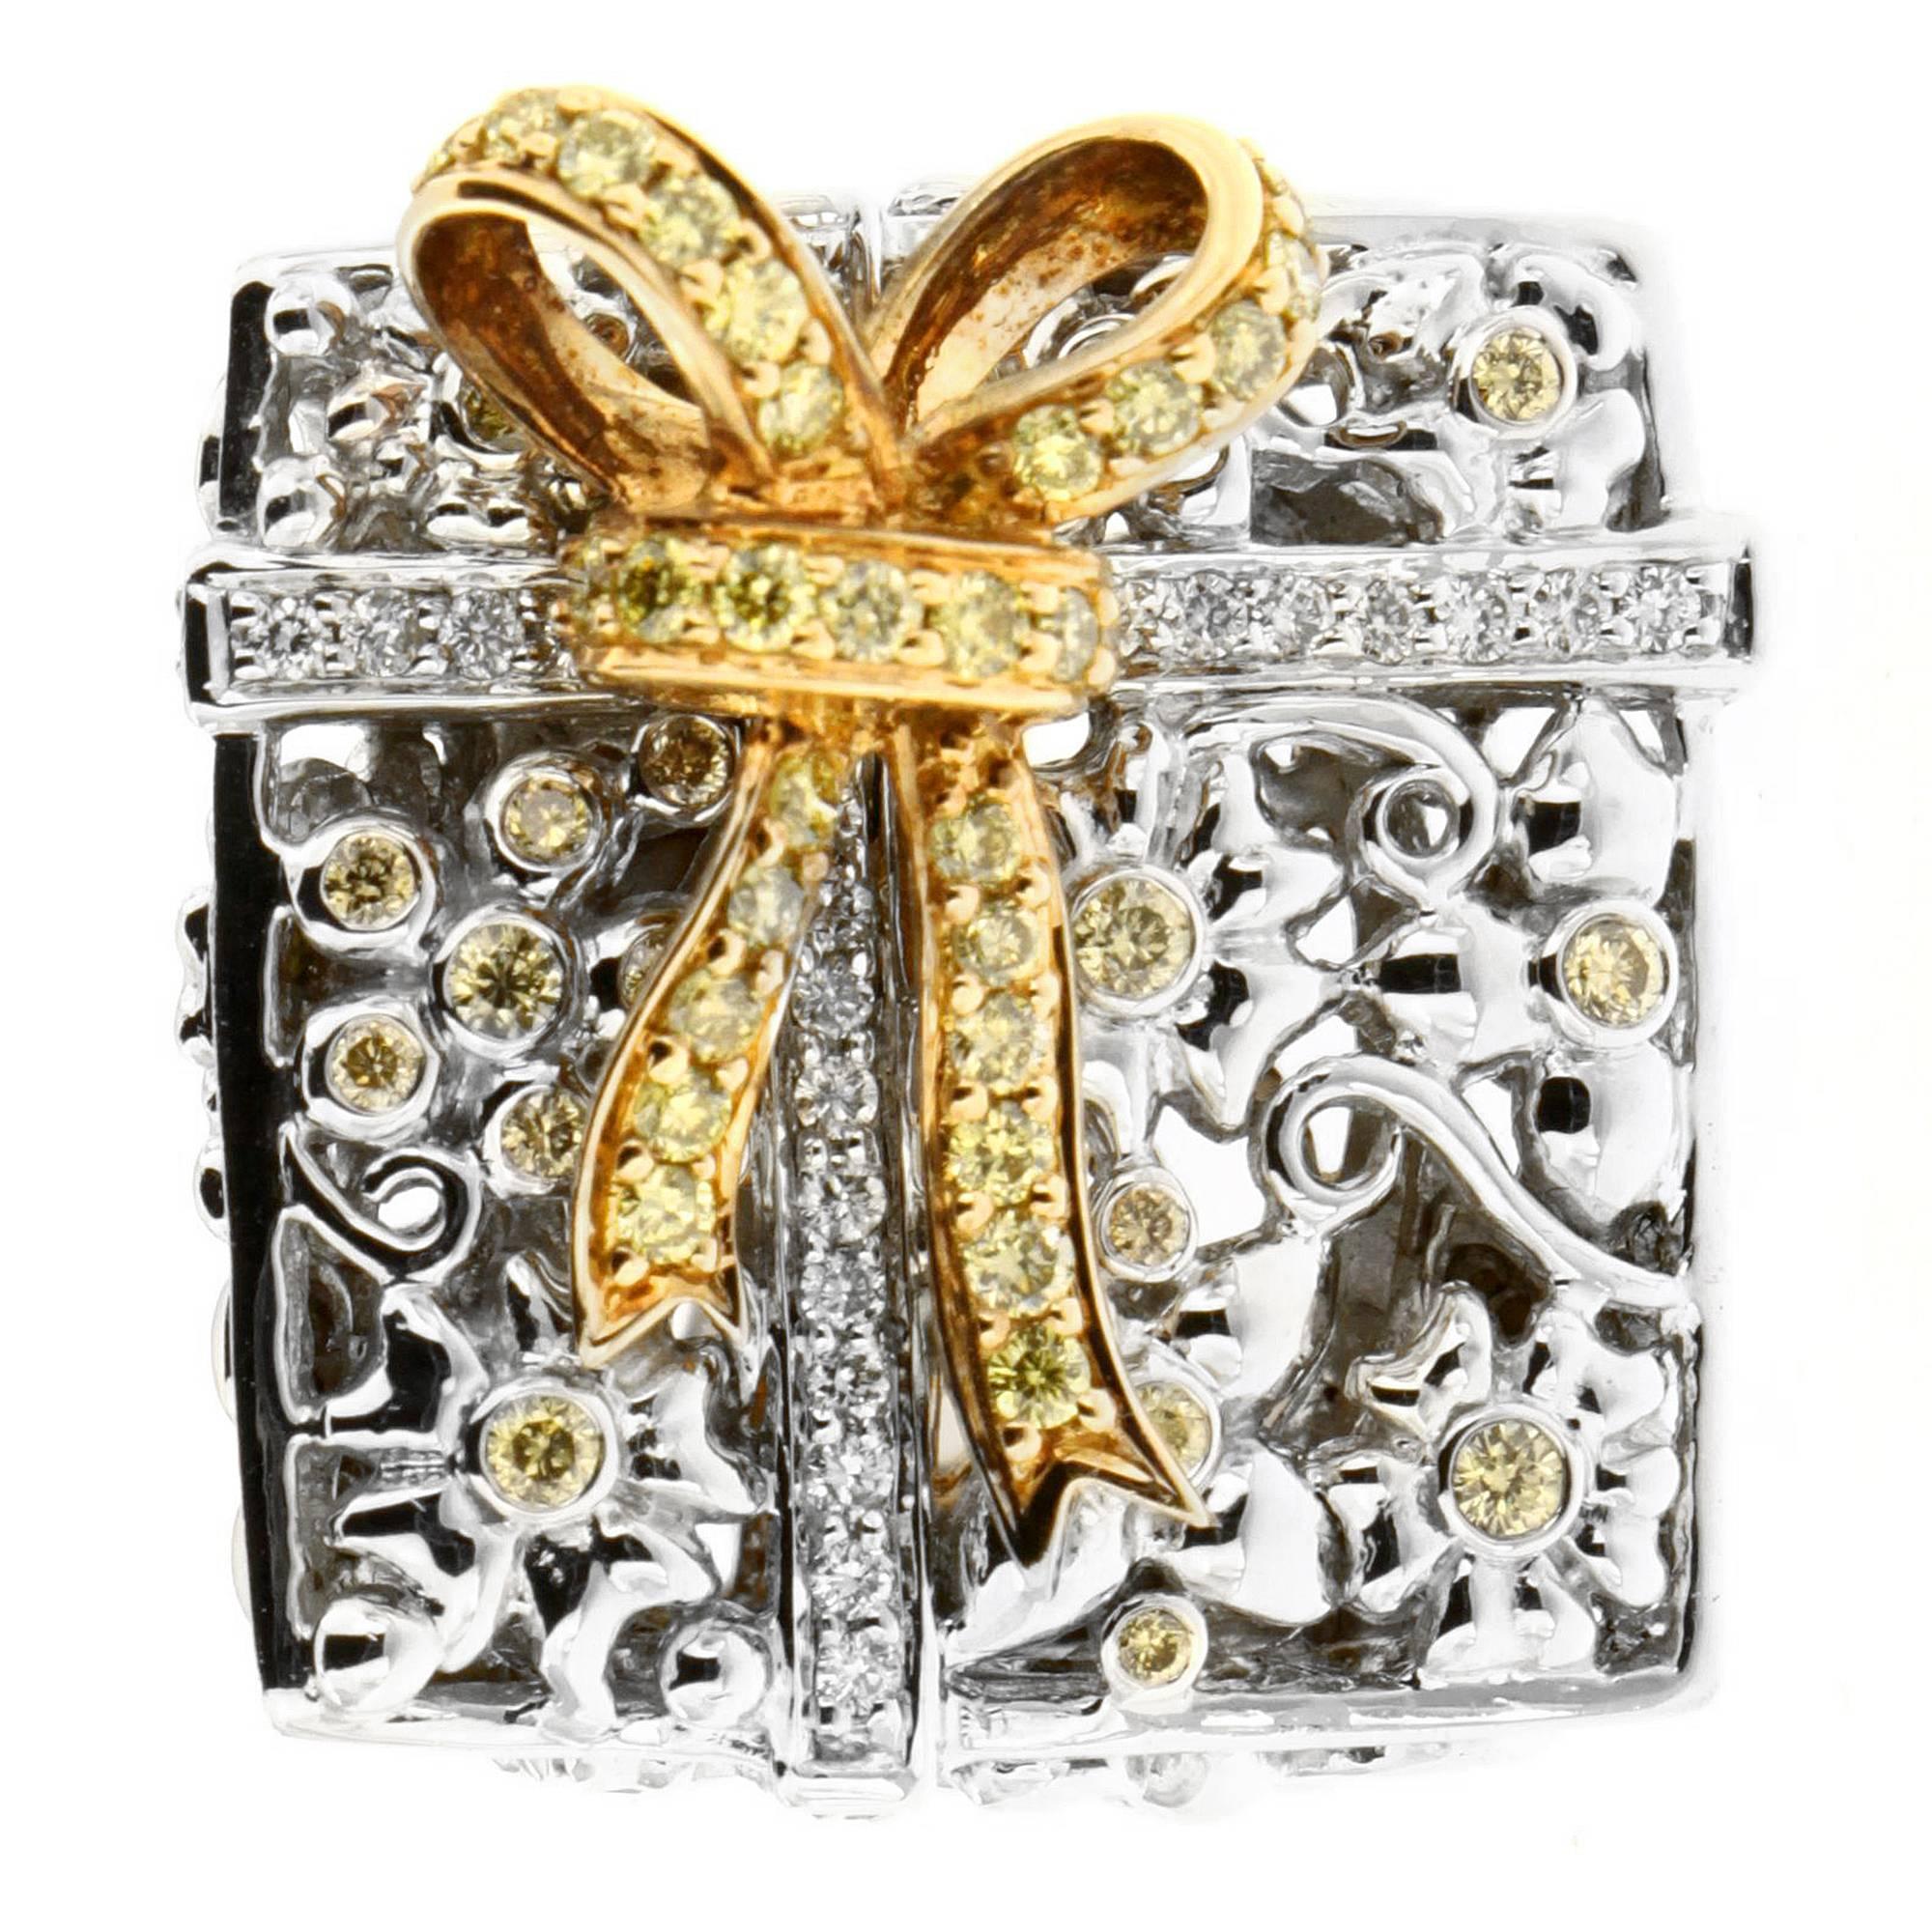 Indulge in Zorab's square cocktail ring featuring 1.06 carats of yellow diamonds and 0.67 carats of white diamonds set in Palladium and 18 Kt Gold metalwork of floral engravings. This luxurious piece is is wrapped in a golden bow set with yellow